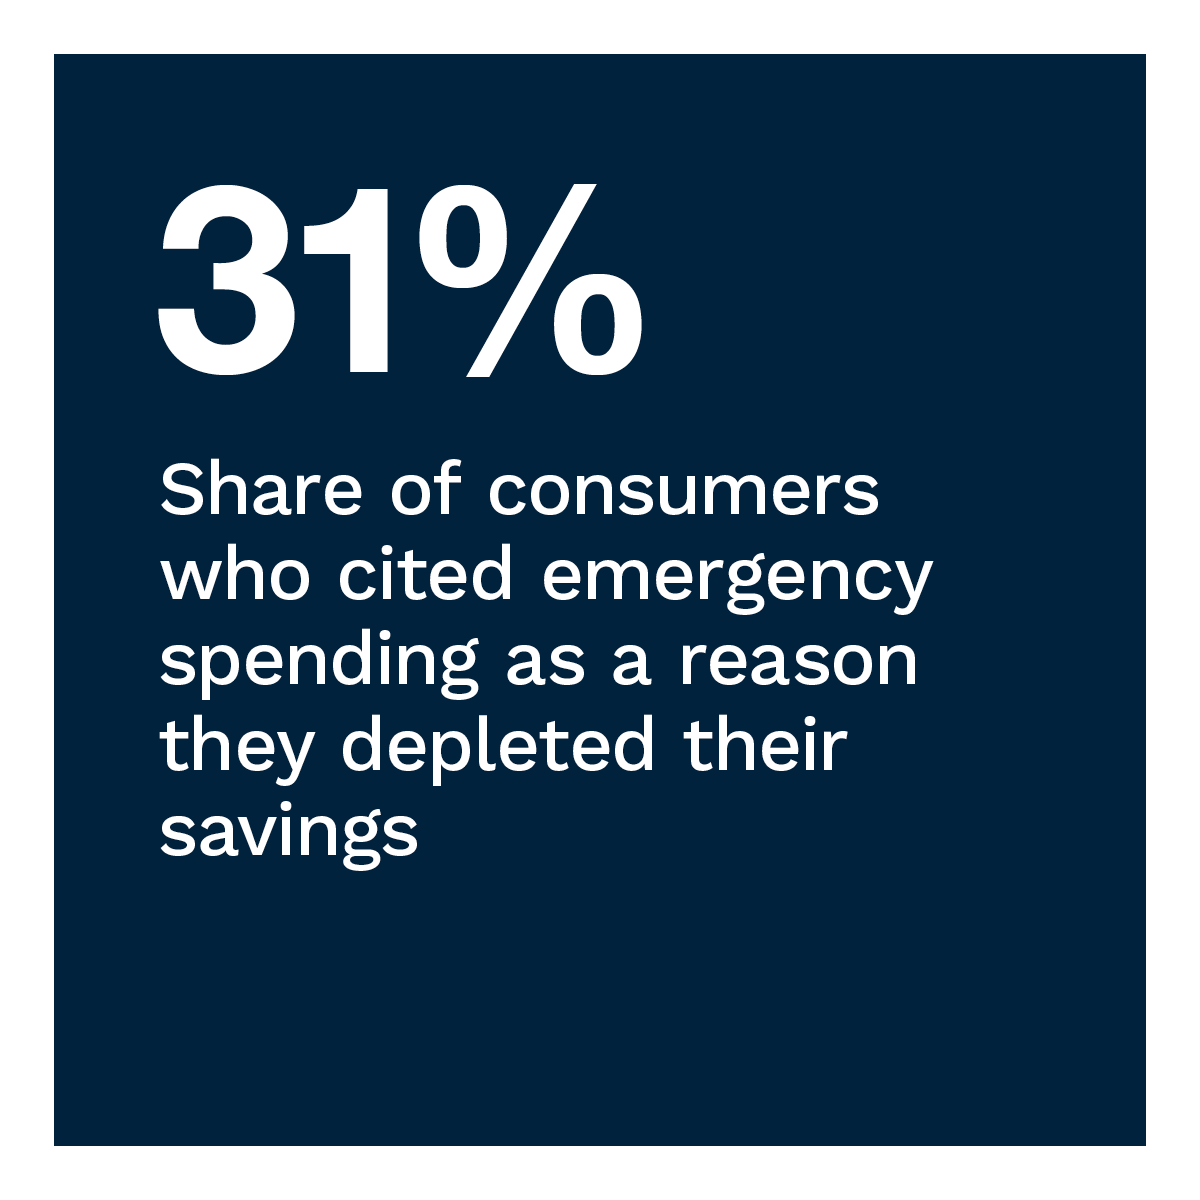 31%: Share of consumers who cited emergency spending as a reason they depleted their savings